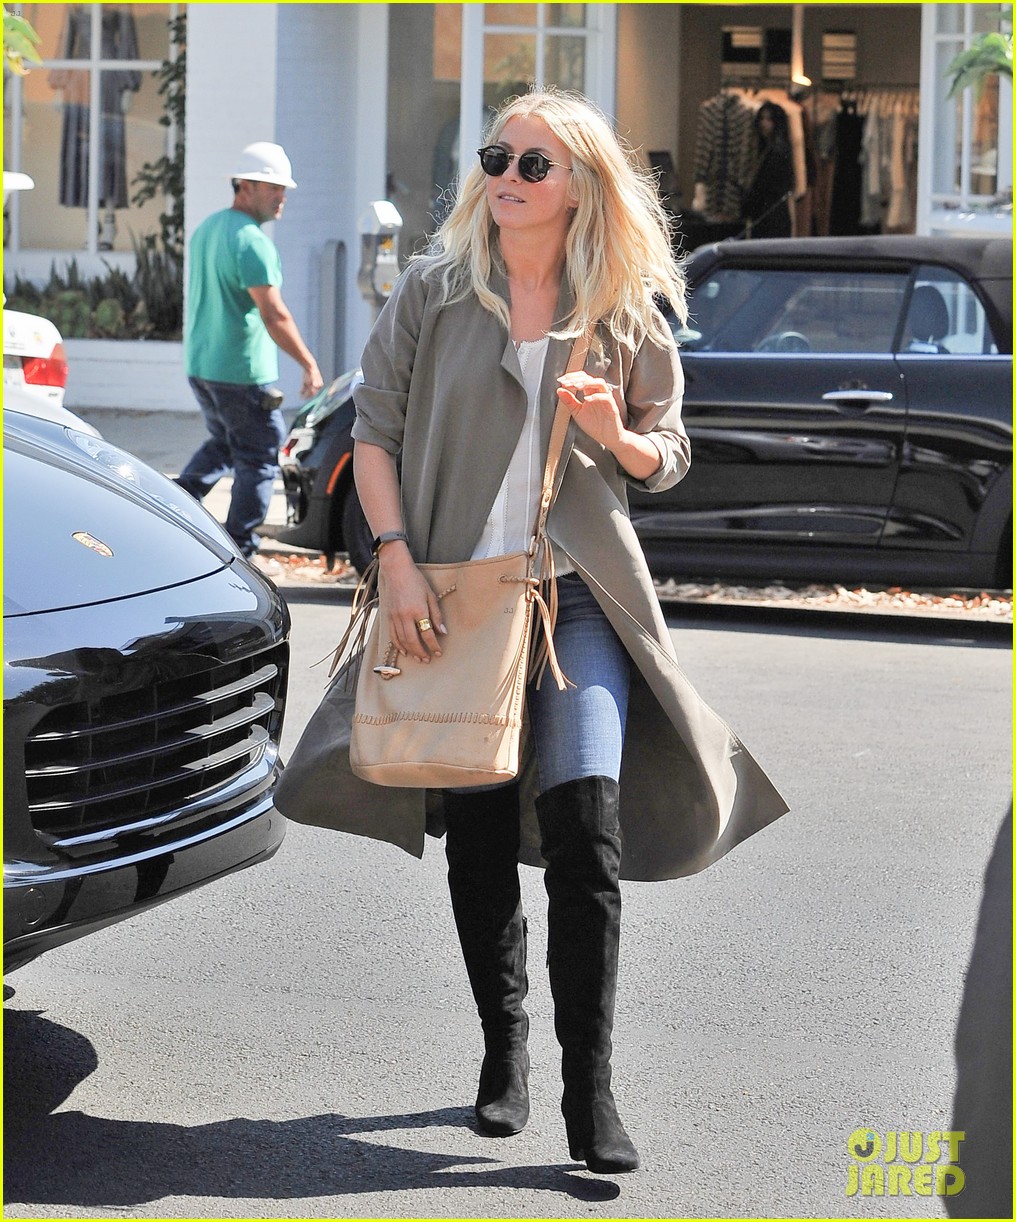 julianne hough enjoys her afternoon shopping19915mytext